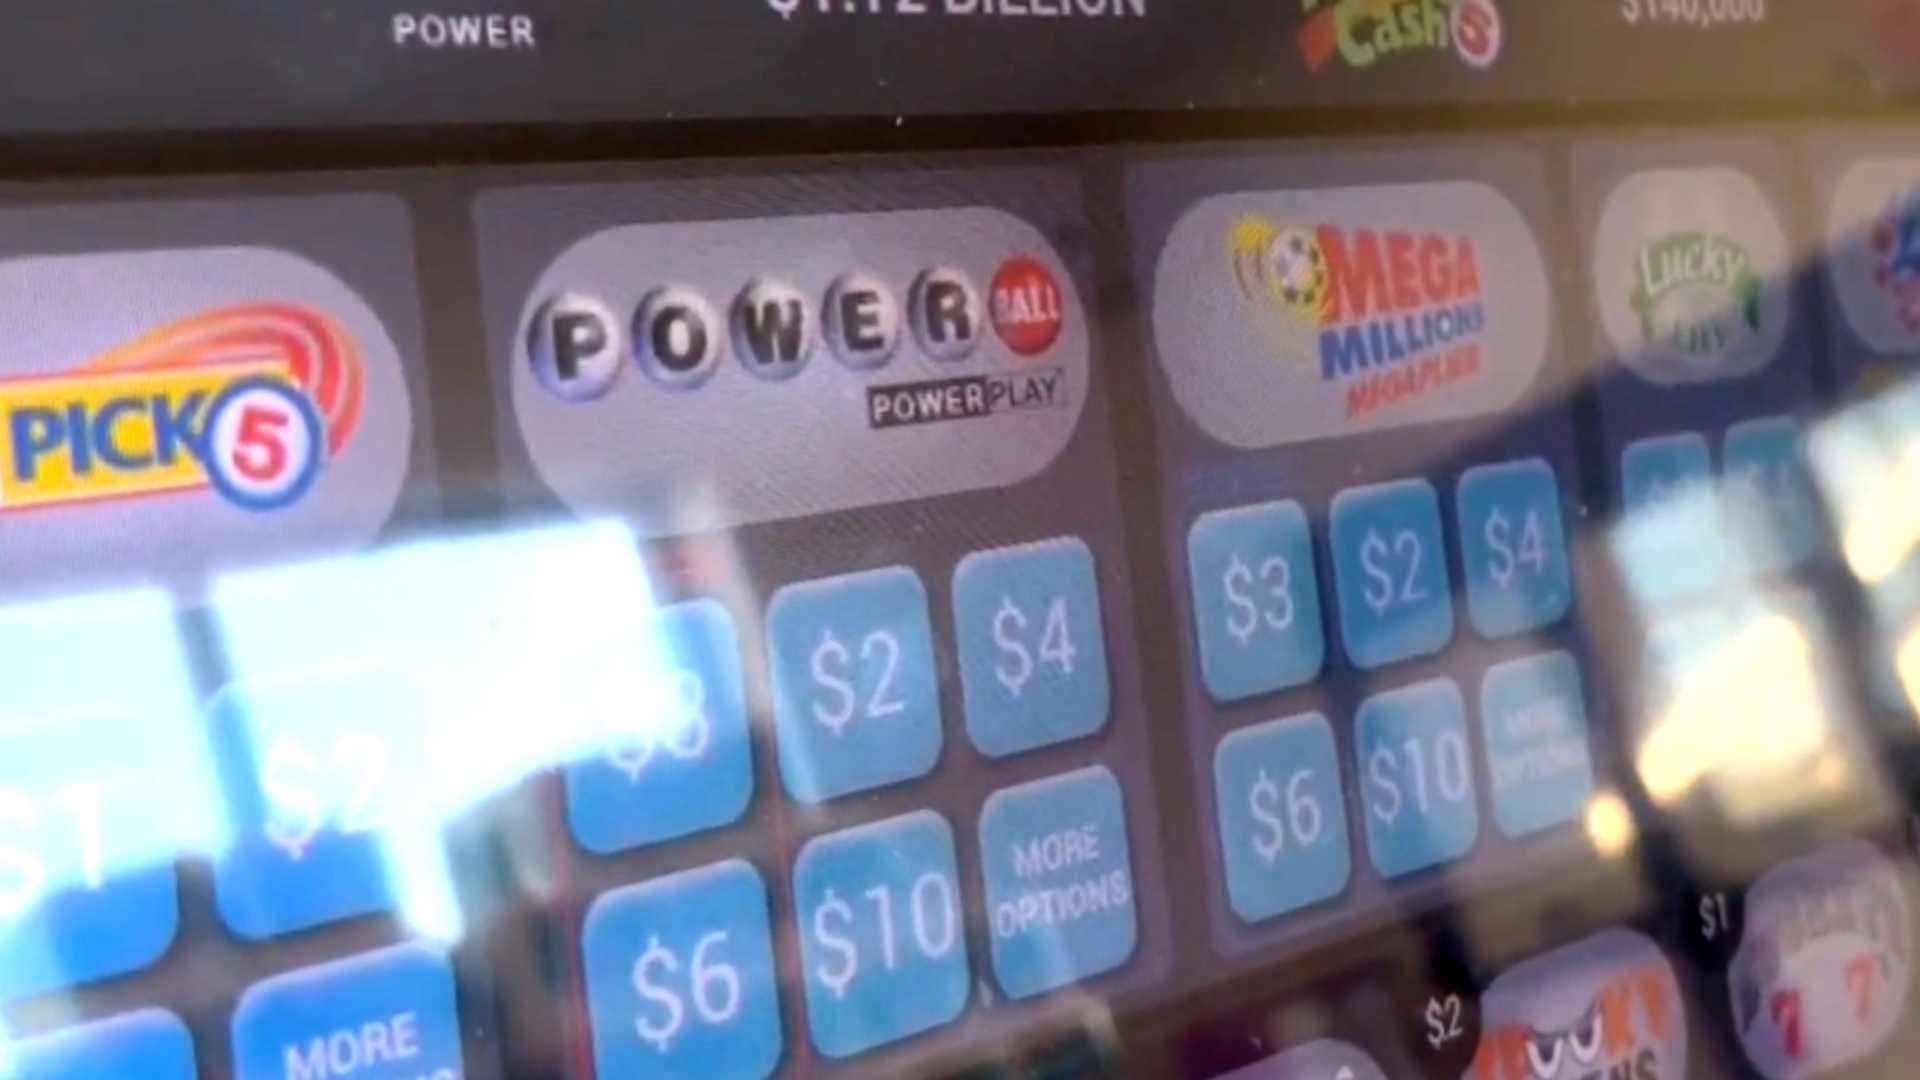 The winning ticket for a $139.3 million jackpot was sold at a Walmart in Huber Heights, near Dayton.